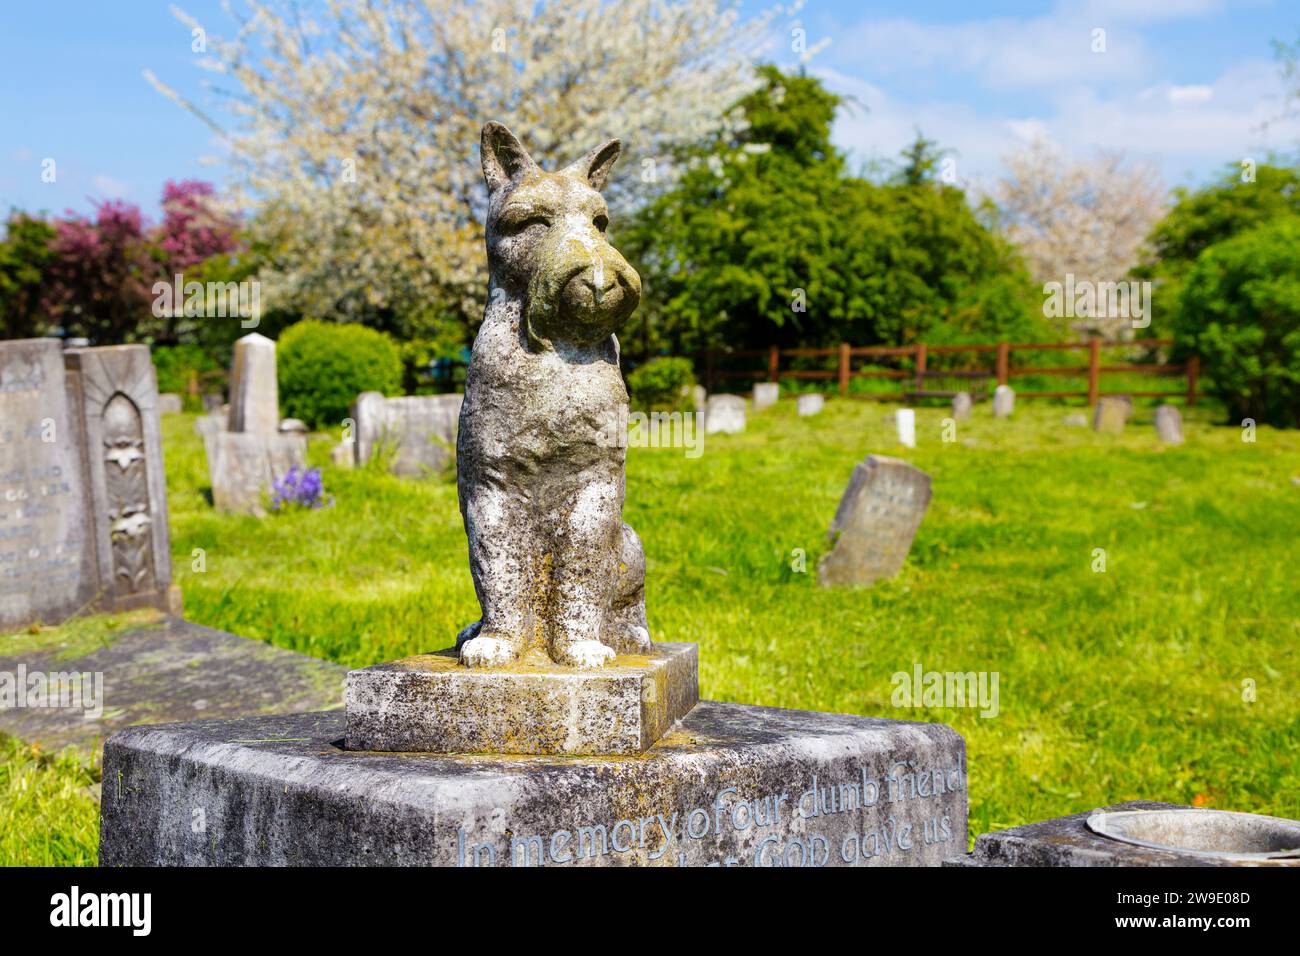 Funerary monument of a dog at the Ilford PDSA Animal Cemetery, Ilford, England Stock Photo